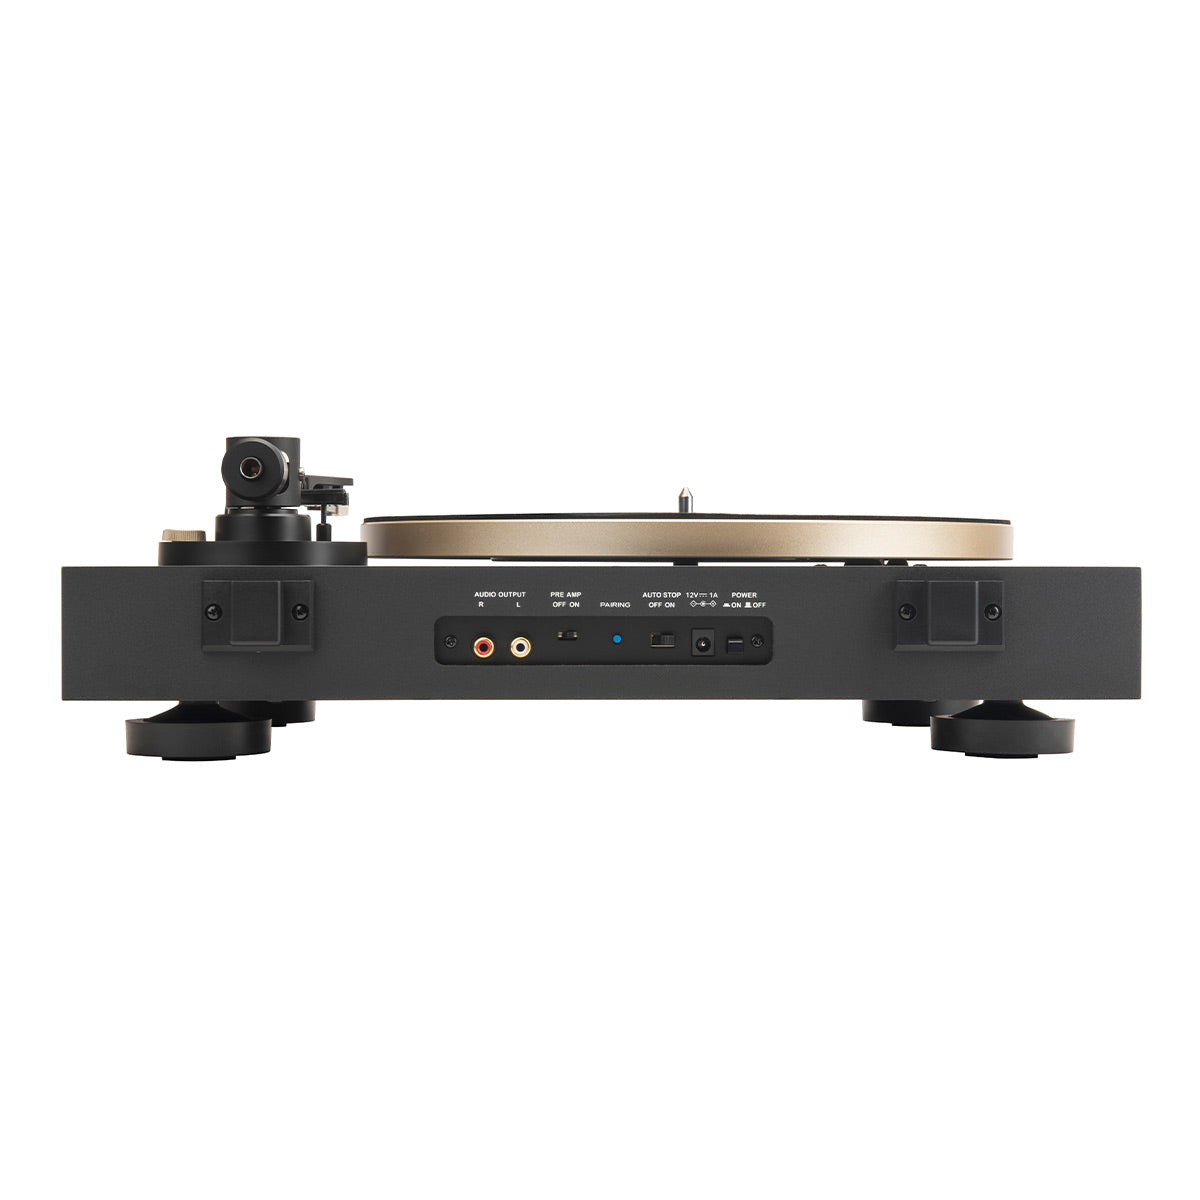 Semi-Automatic Stereo Wide and 5.3 Technica Installed | Cartridge World Audio & BT Bluetooth Belt-Drive Turntable (Black Gold) with JBL Spinner